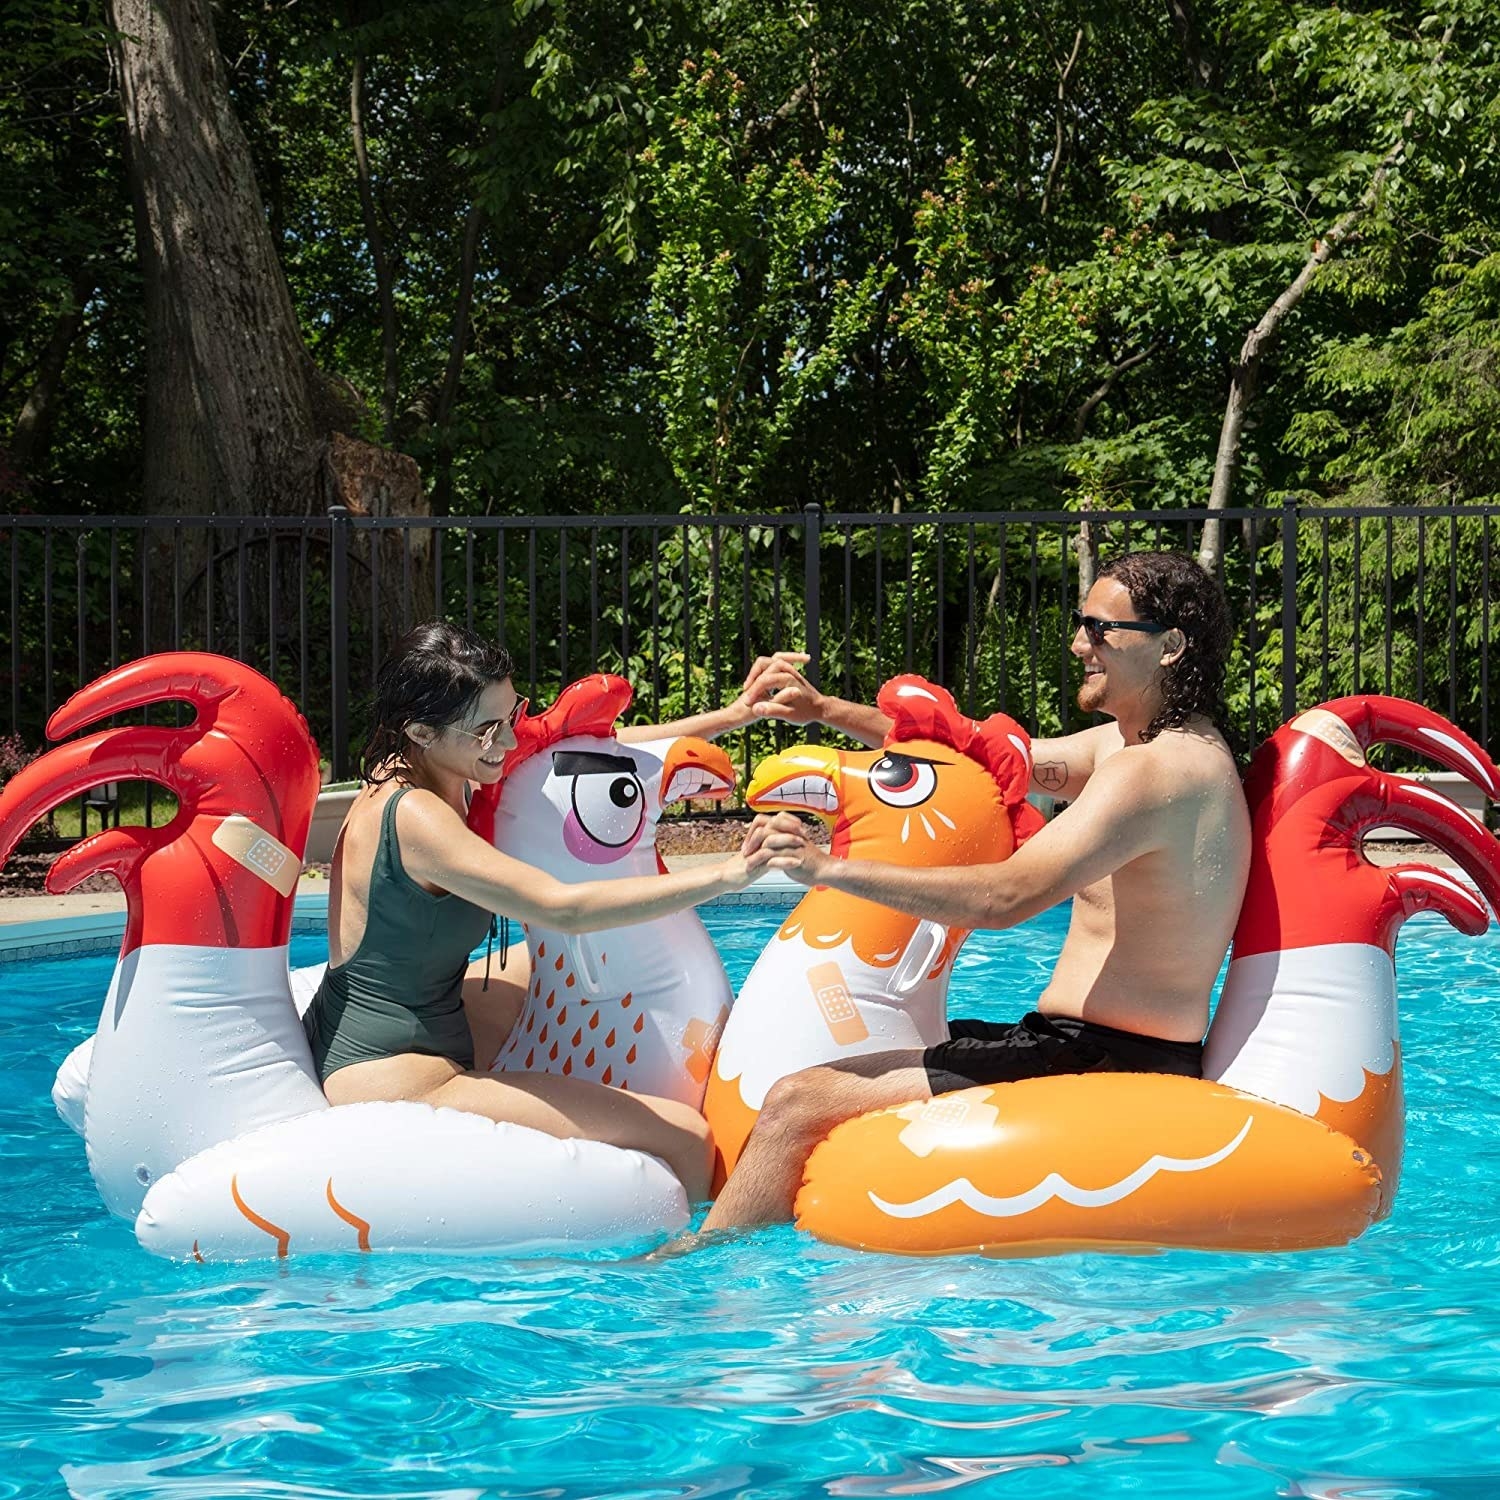 Two people, one on each inflatable chicken, trying to push the other person off 